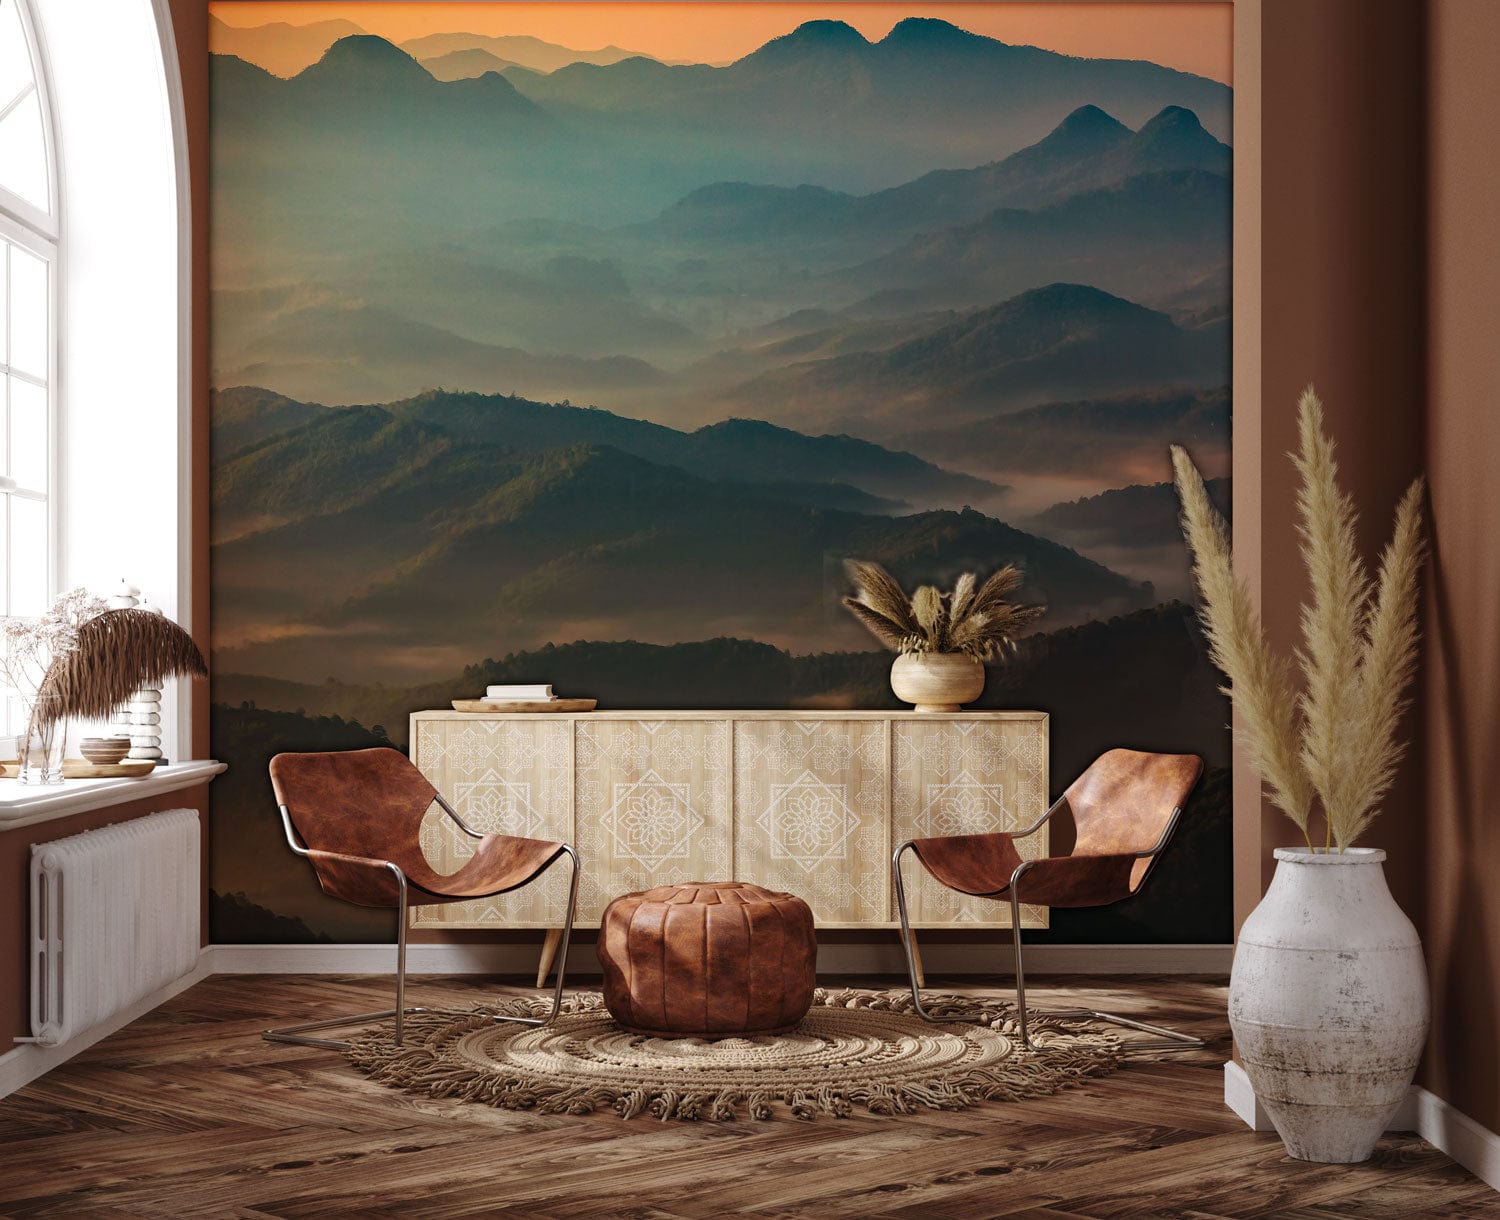 Wallpaper mural depicting mountains and landscapes, ideal for use in hallway decor.